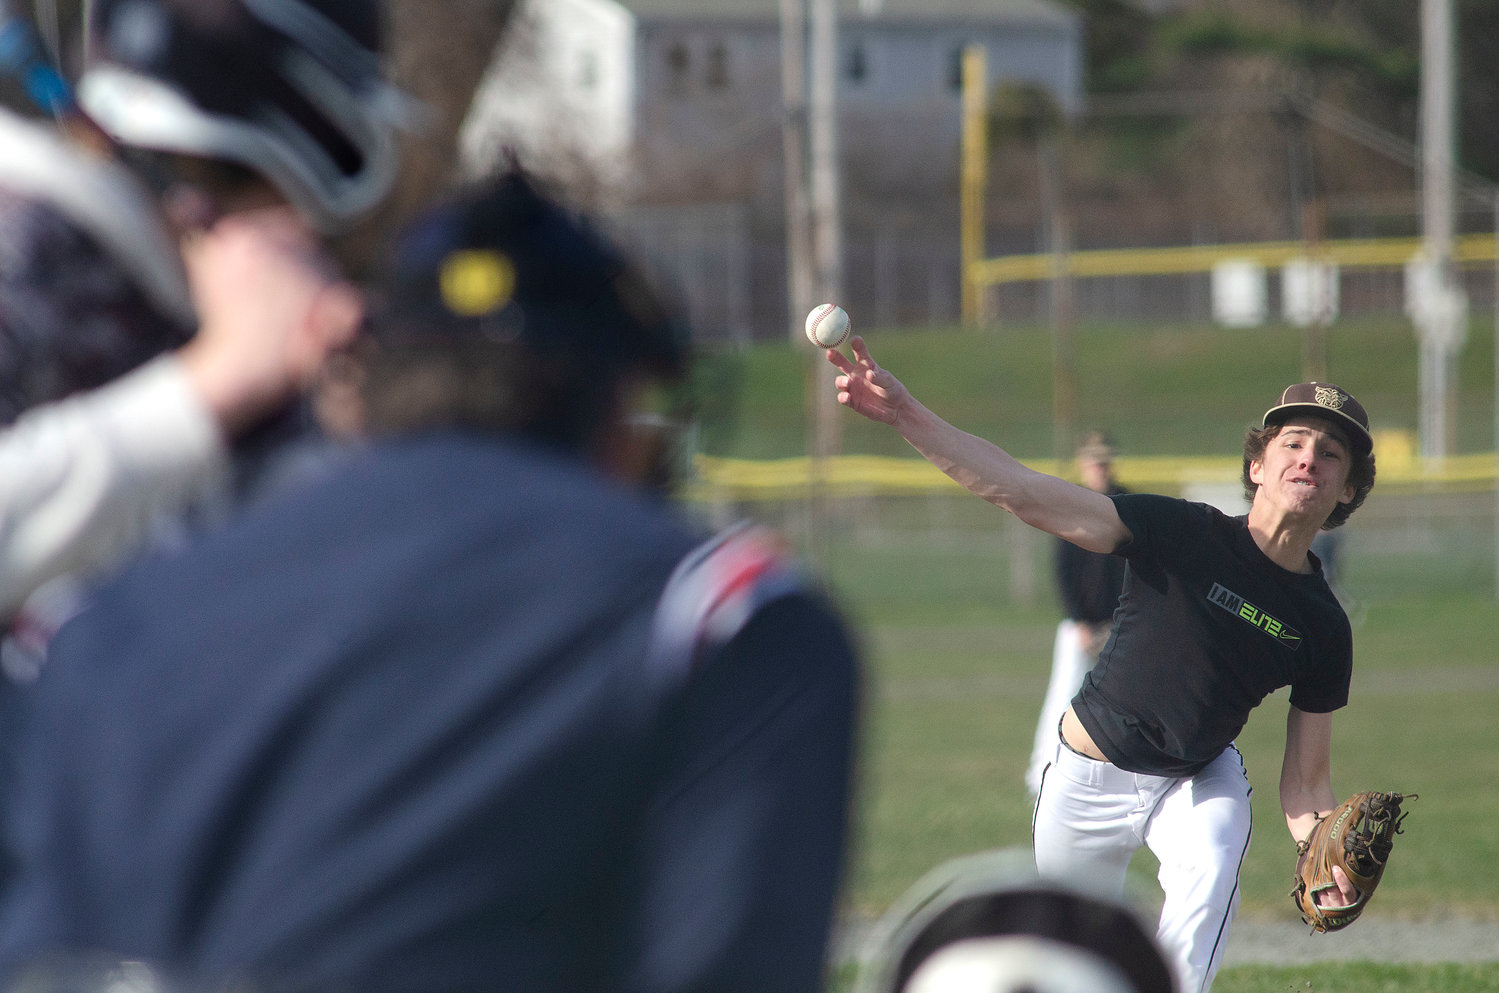 Max Gallant throws a heater during the Wildcats' home scrimmage game against Tiverton on Wednesday.